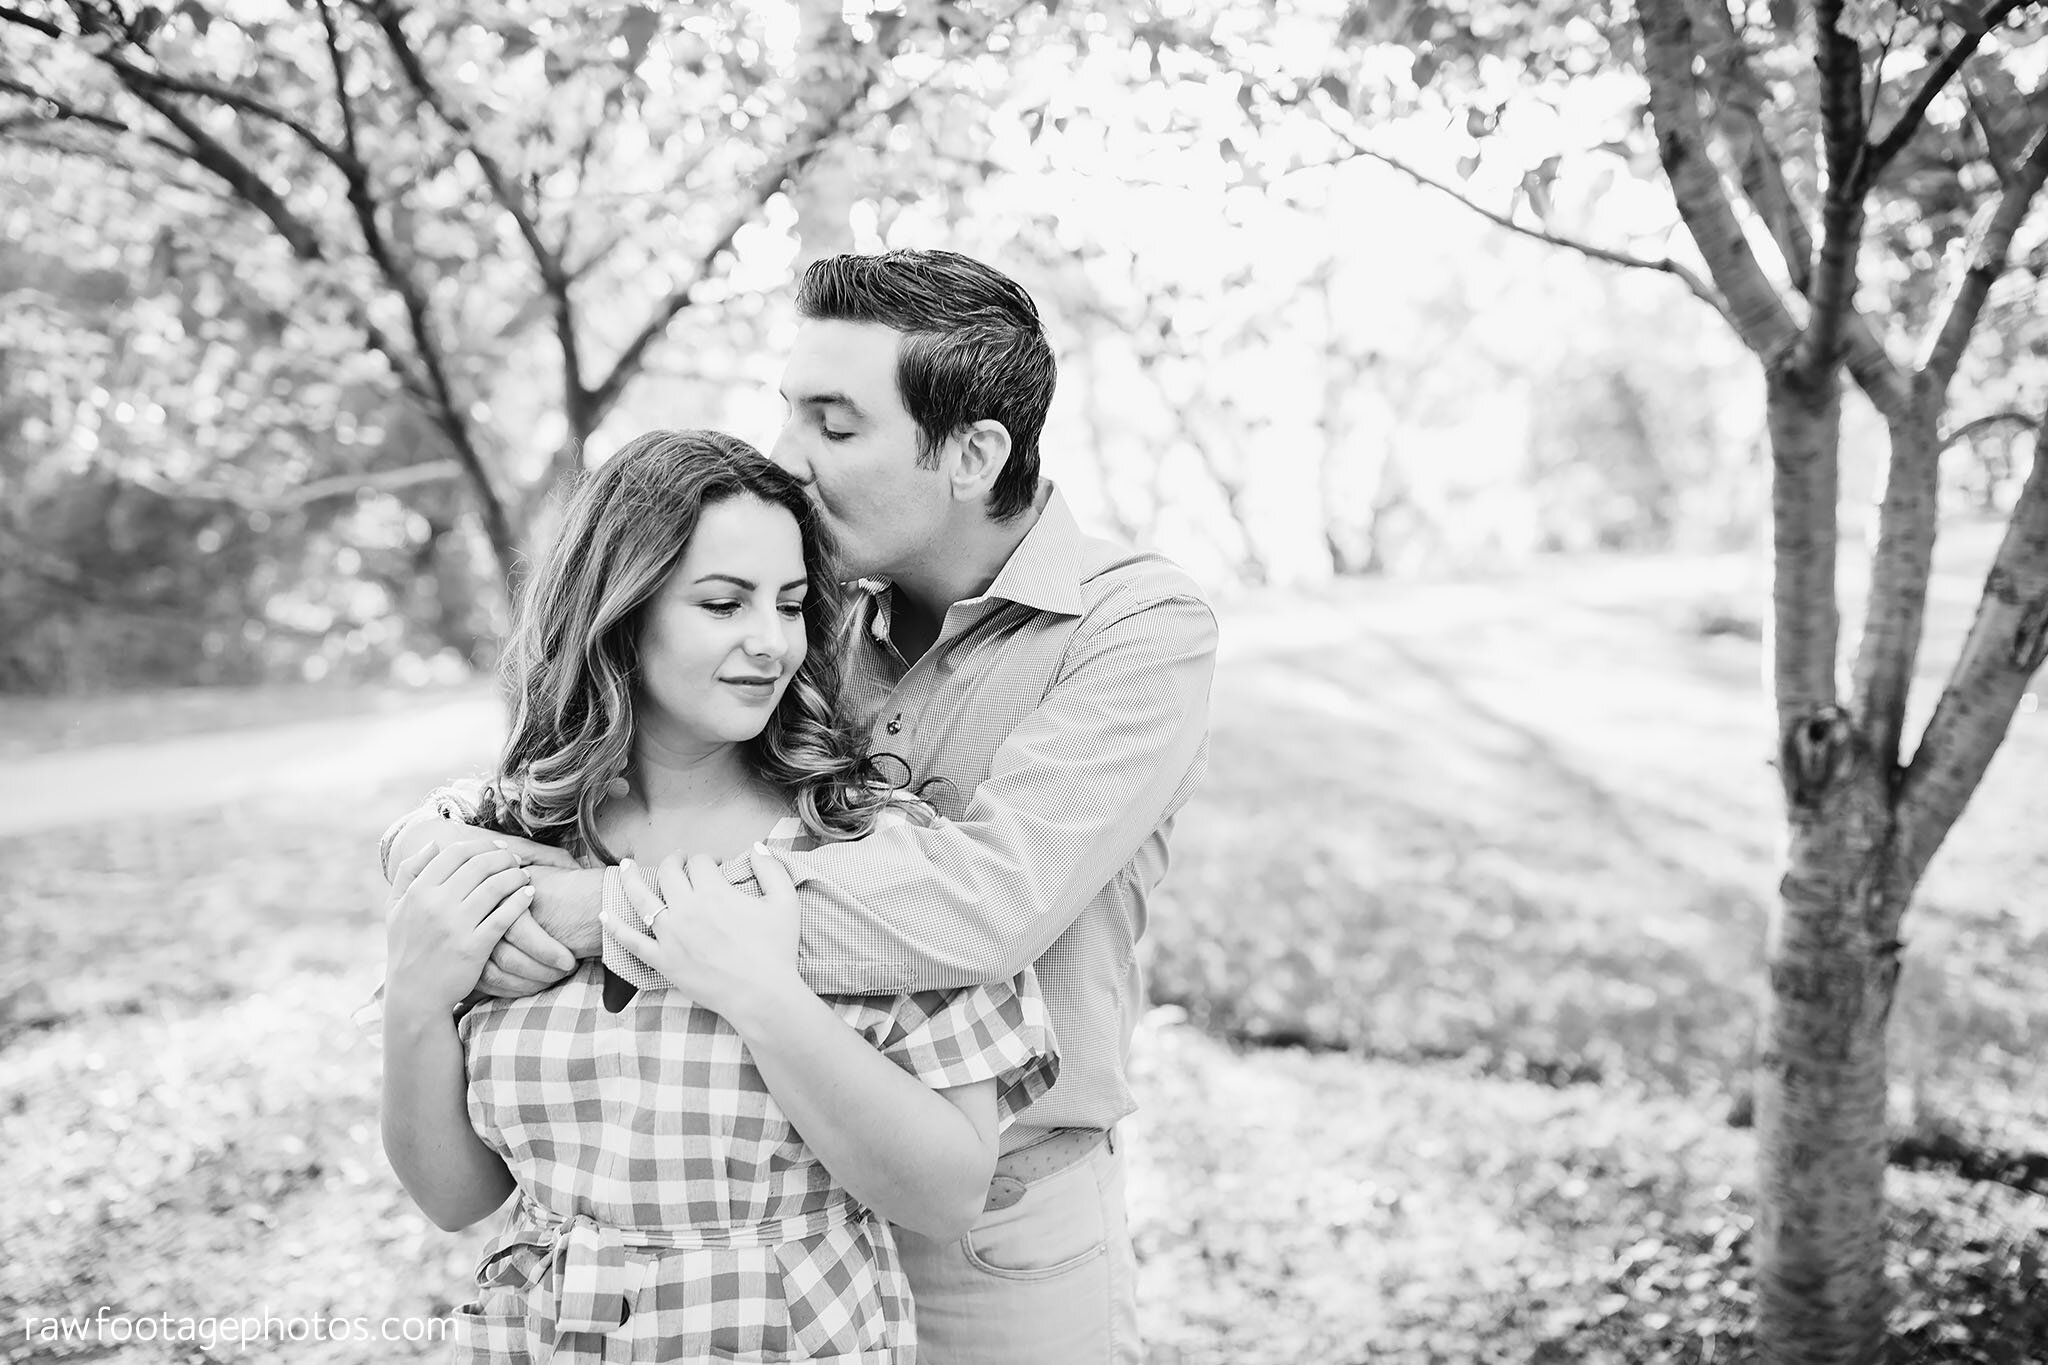 london_ontario_wedding_photographer-raw_footage_photography-spring_engagement_session-spring_blossoms-ivey_park_006.jpg